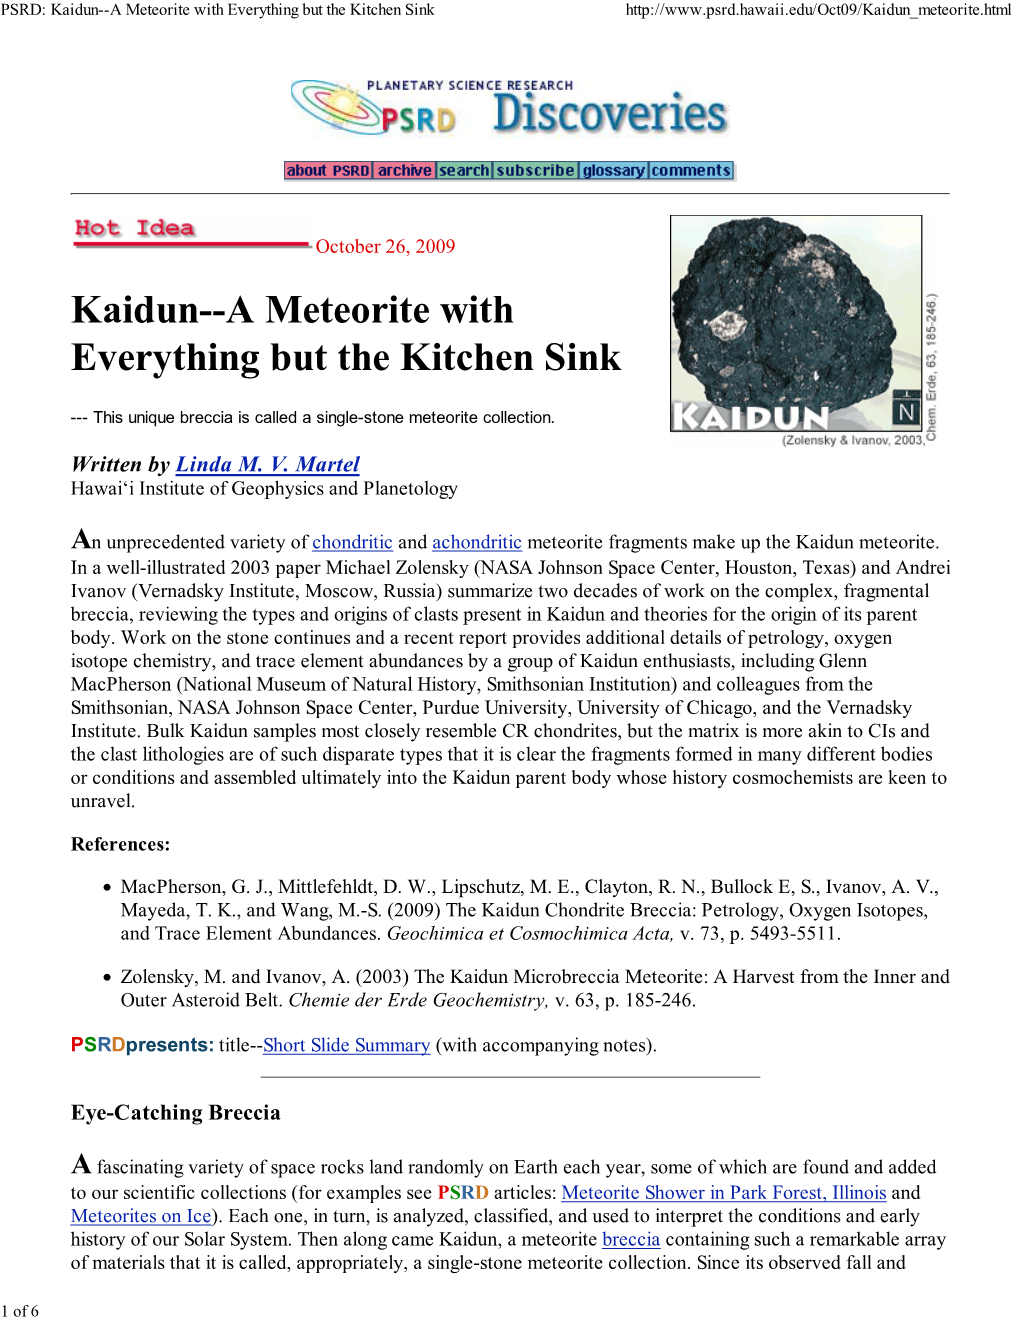 PSRD: Kaidun--A Meteorite with Everything but the Kitchen Sink